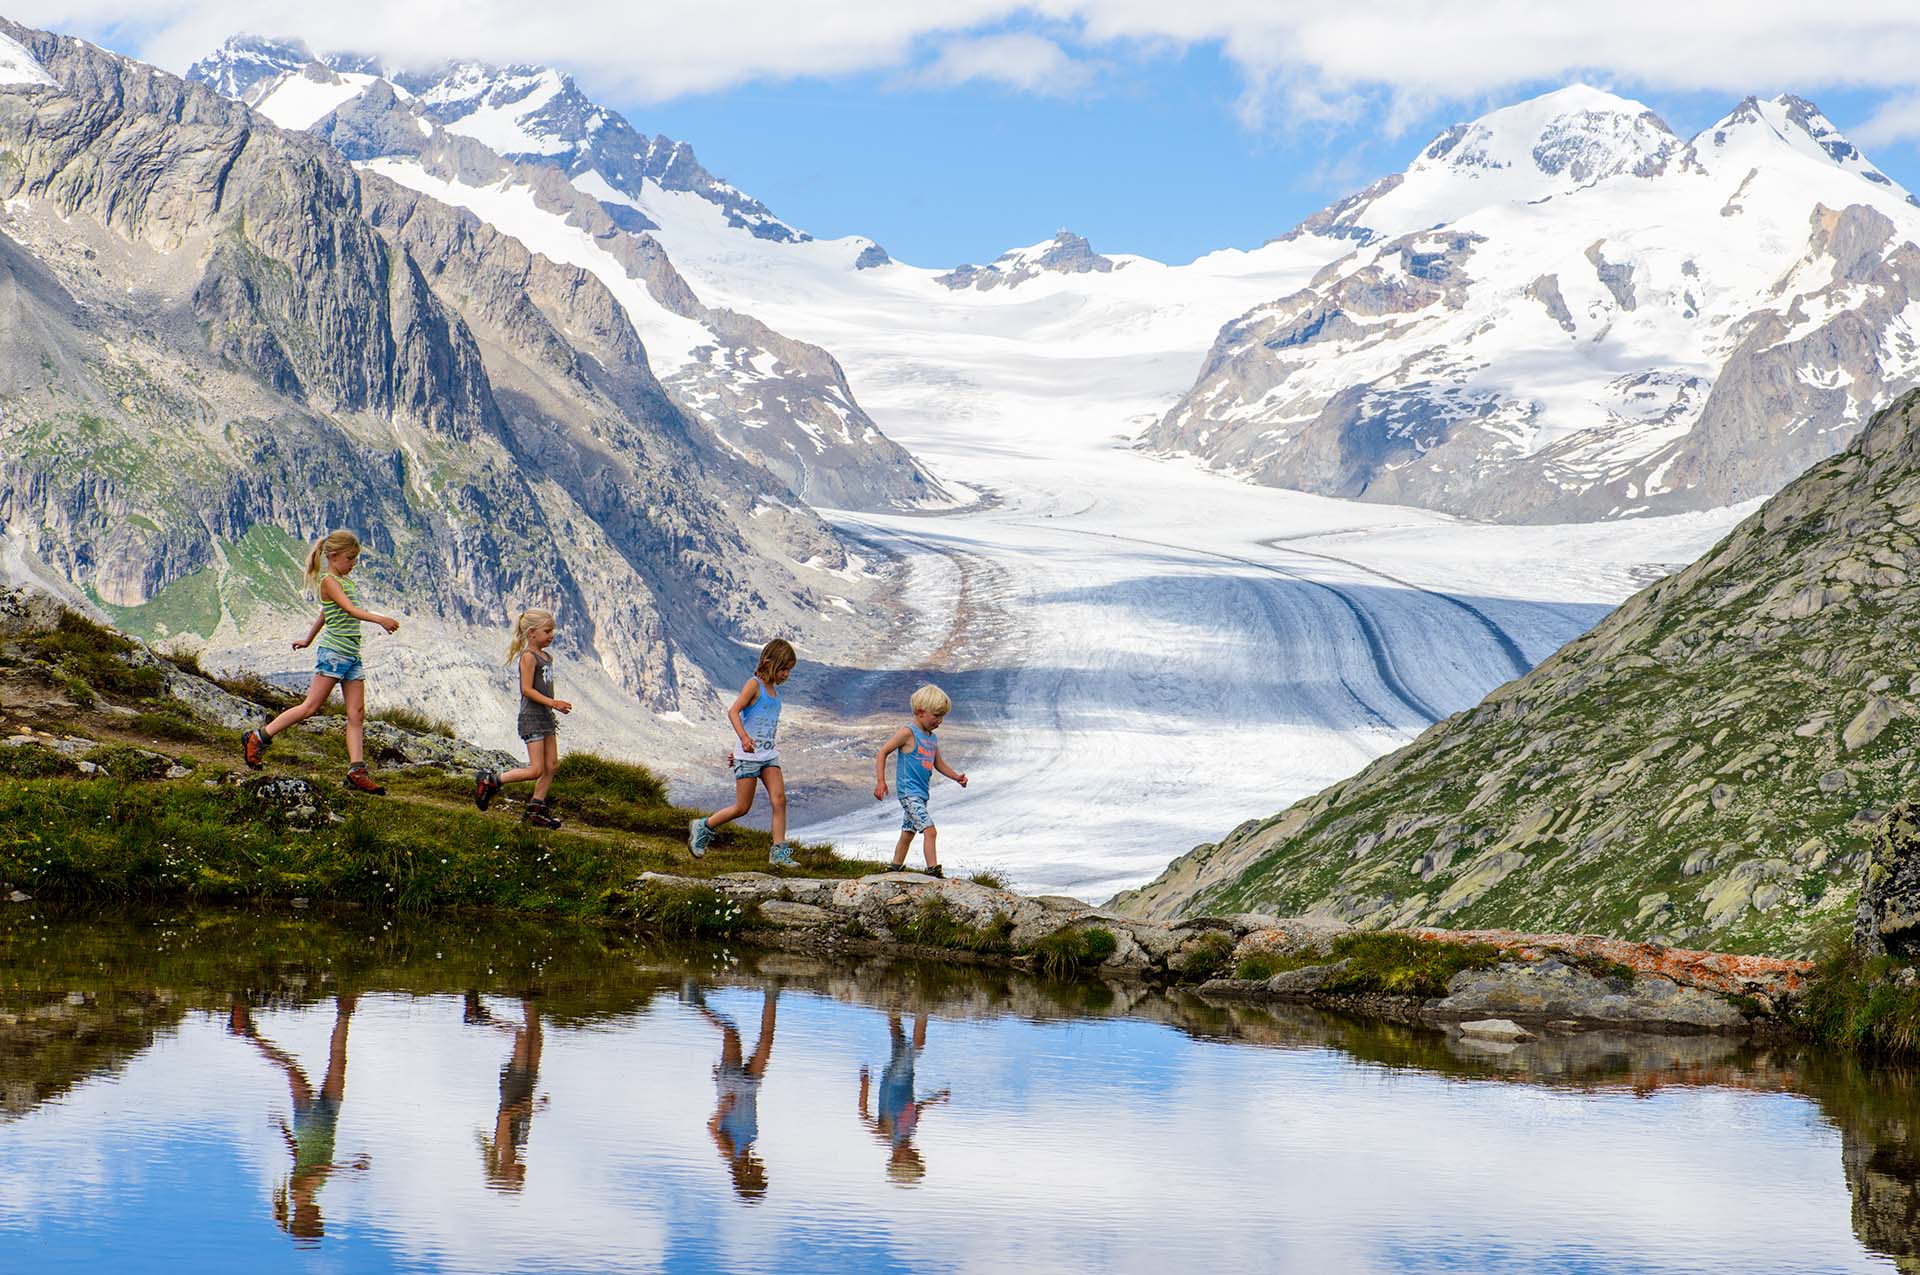 Kids mirrored in water and in background the Aletsch Glacier